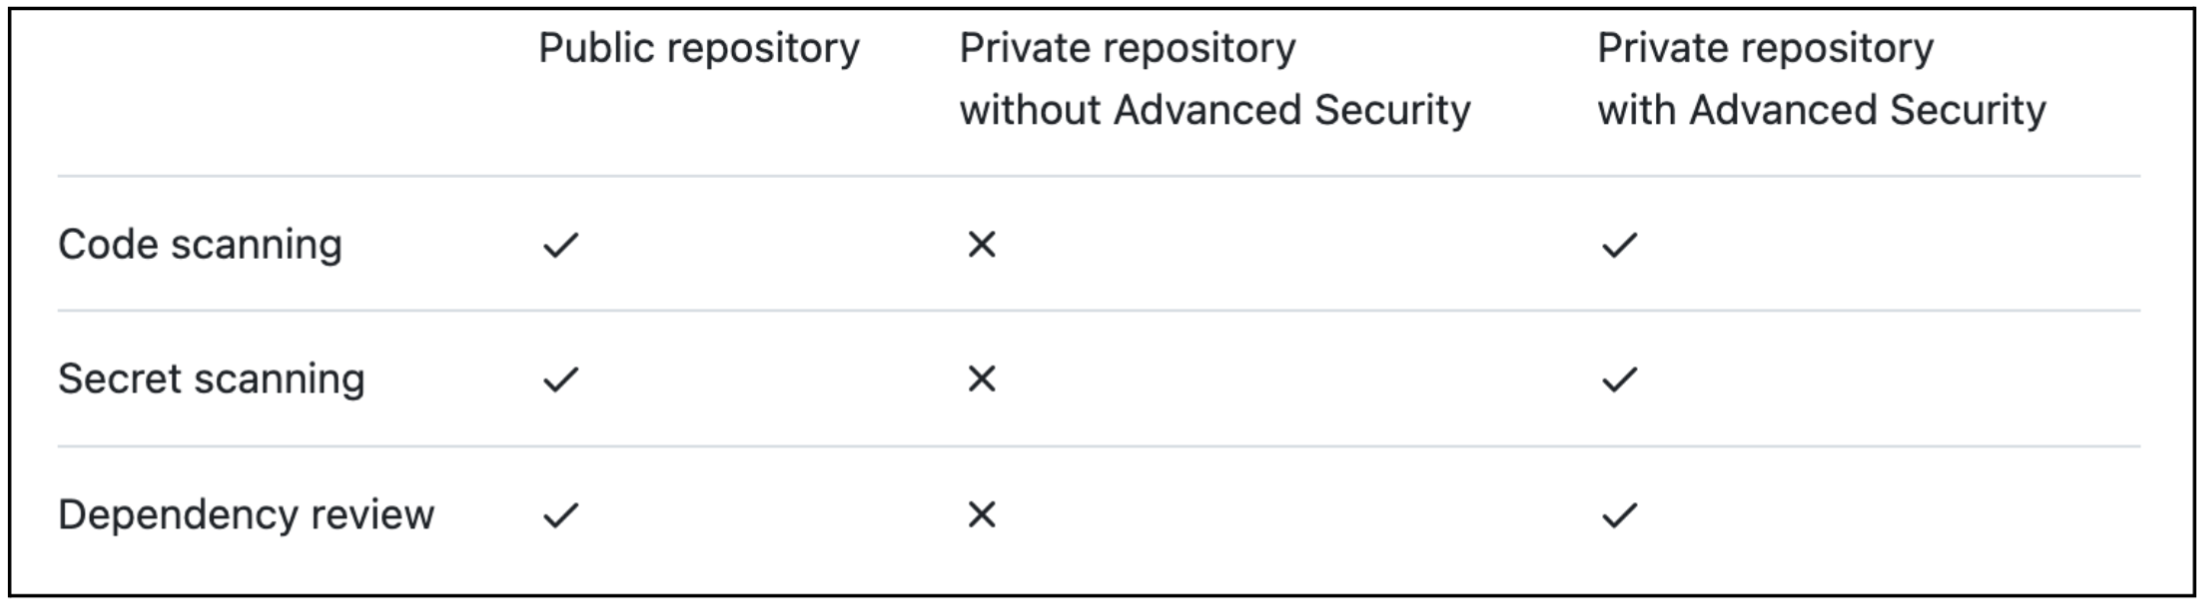 Chart: Availability of GitHub Advanced Security features for public and private repositories (source: github.com): 